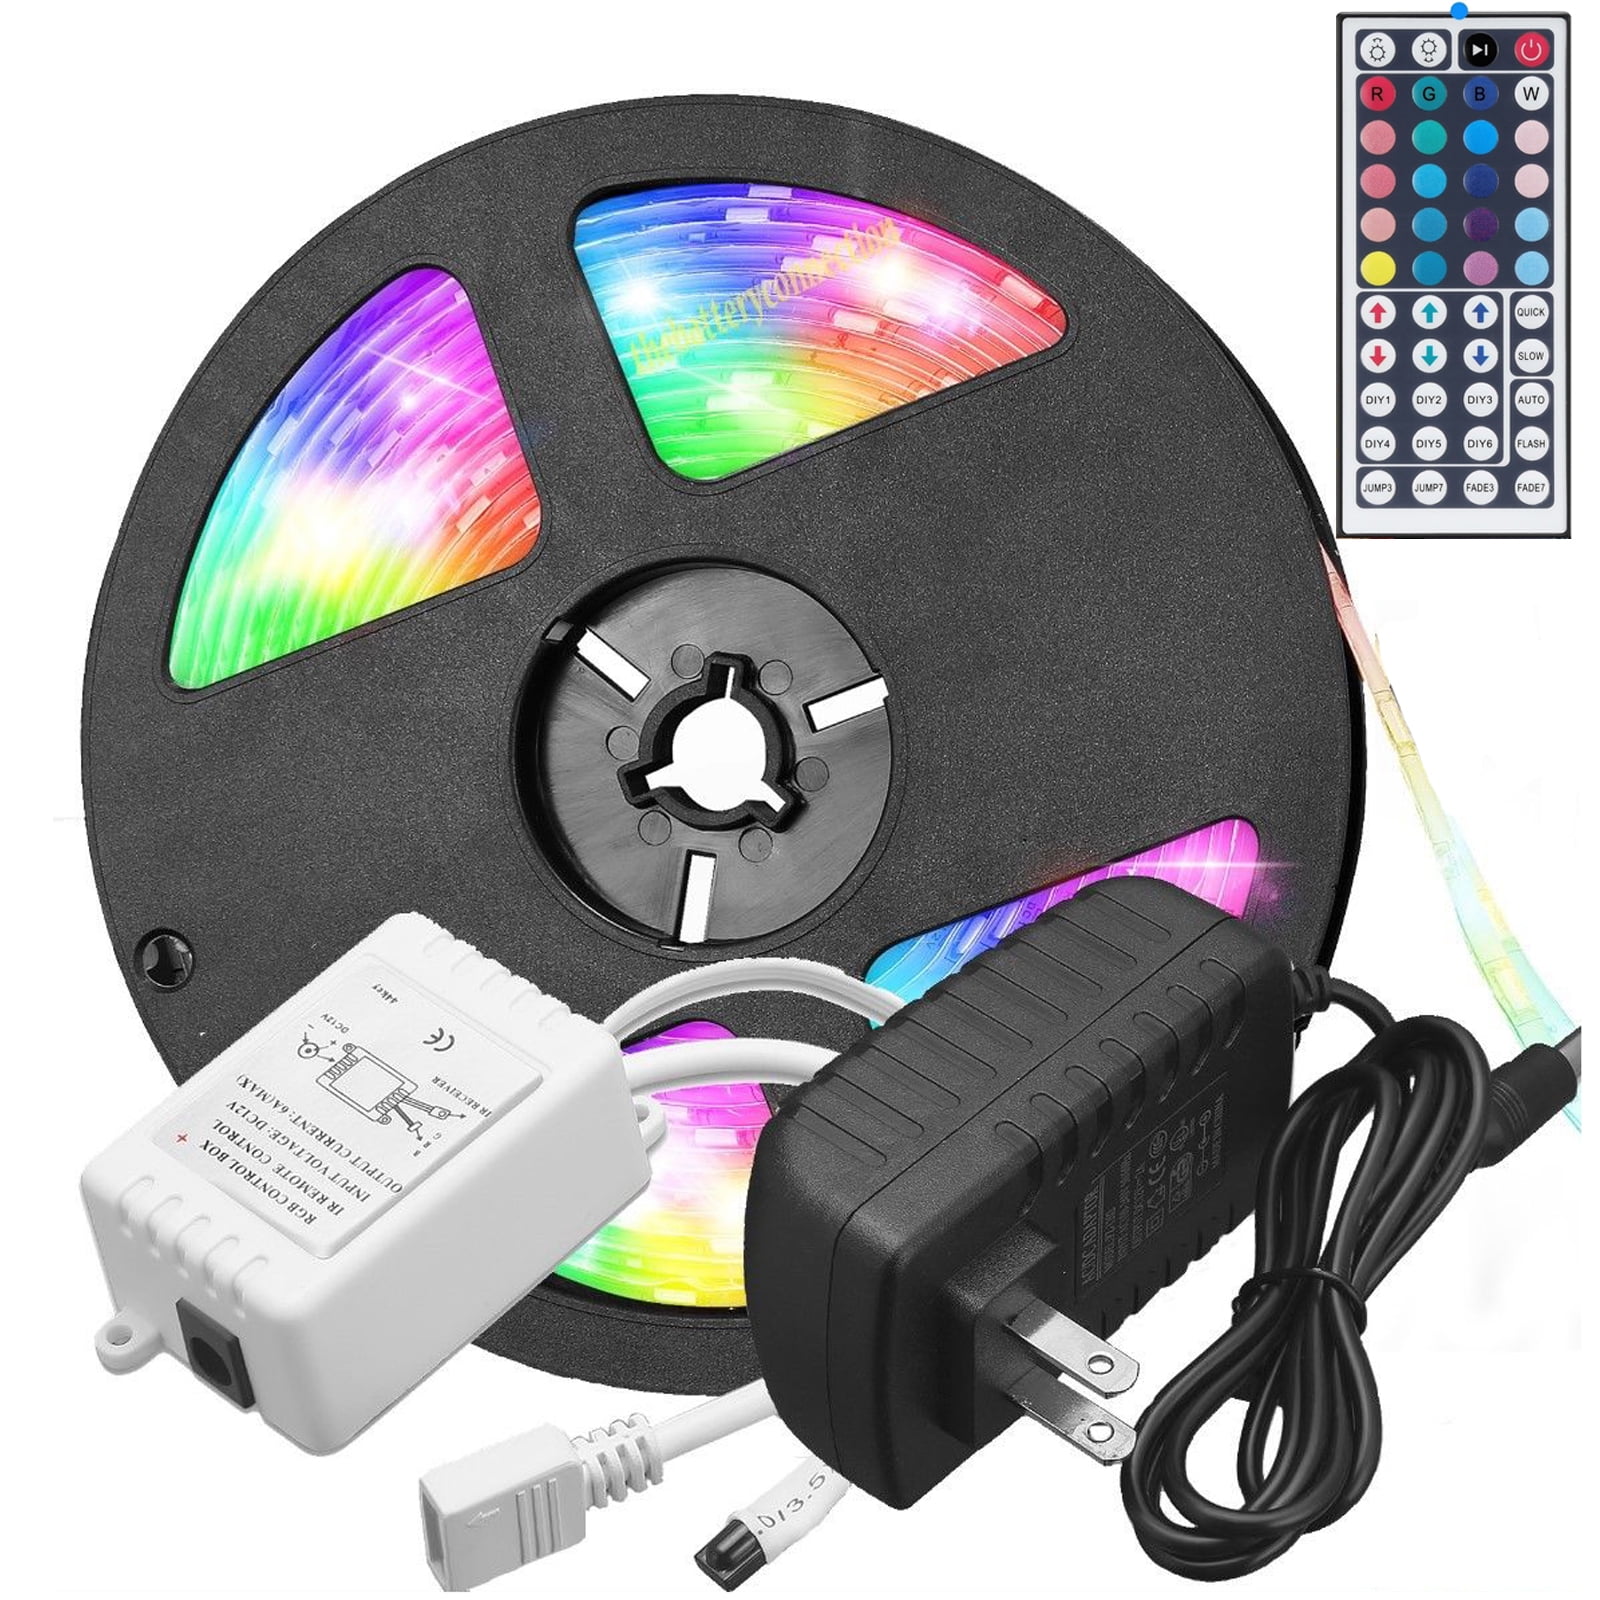 ALED LIGHT 5050 10M 600Leds RGB 60leds/m SMD Non-Waterproof Color Changing  Led Strips Light Kit +44 Key IR Remote+24V AC Power Supply for Home